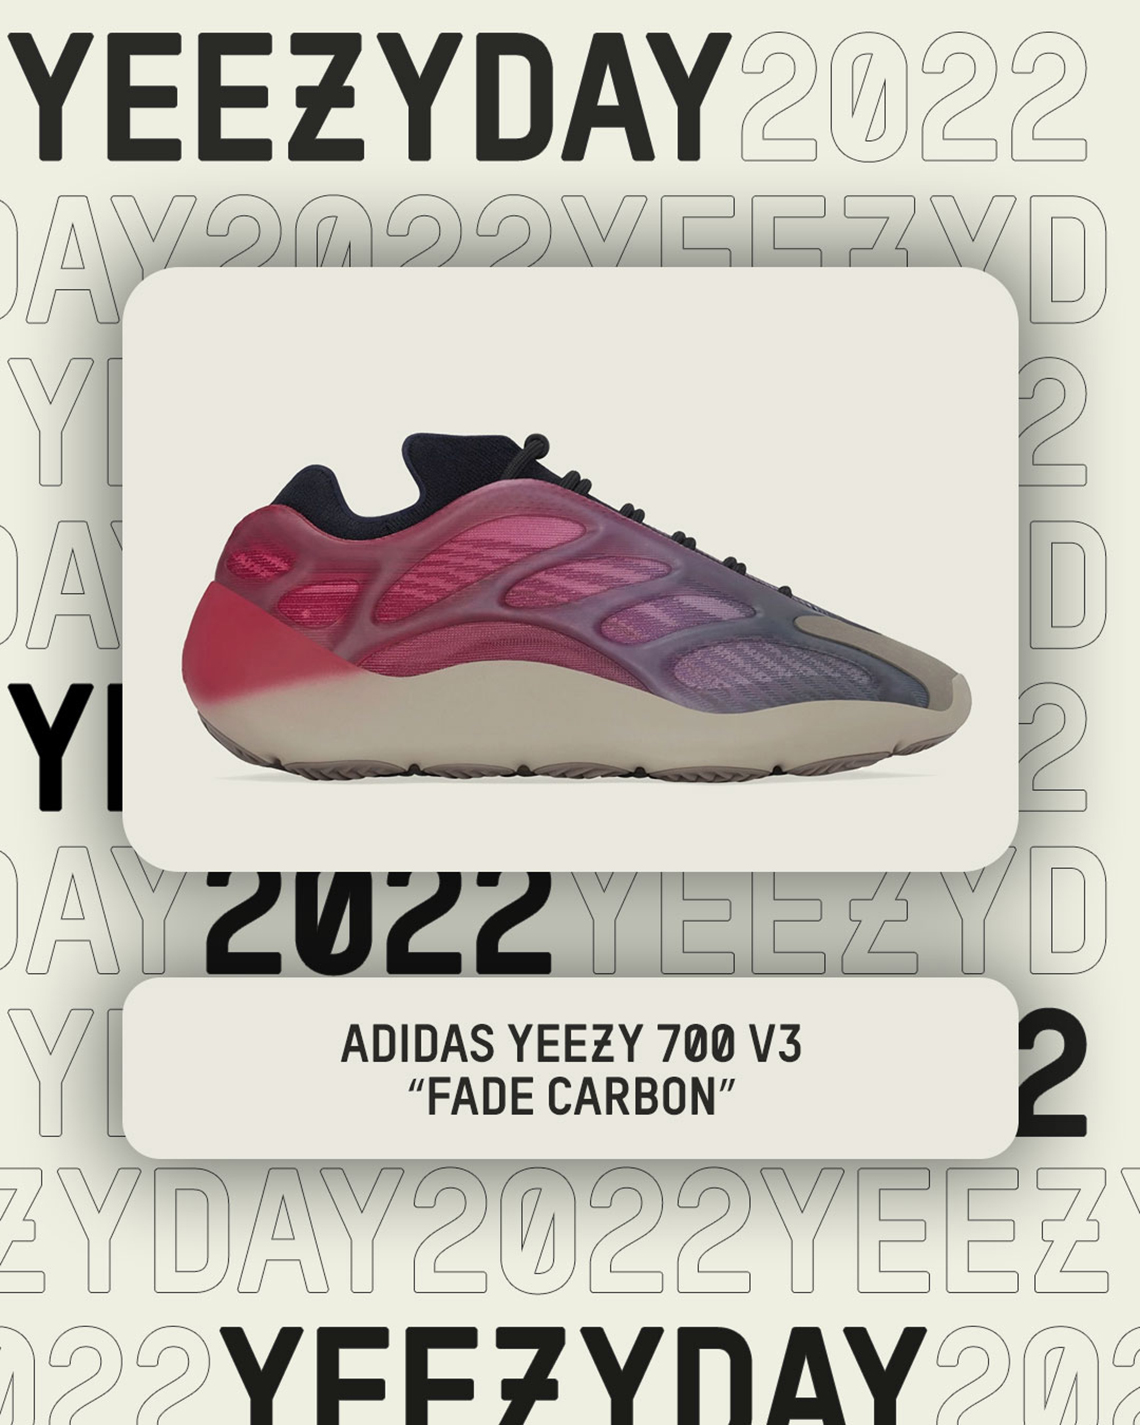 YEEZY DAY 2022 Releases August 2nd & 3rd